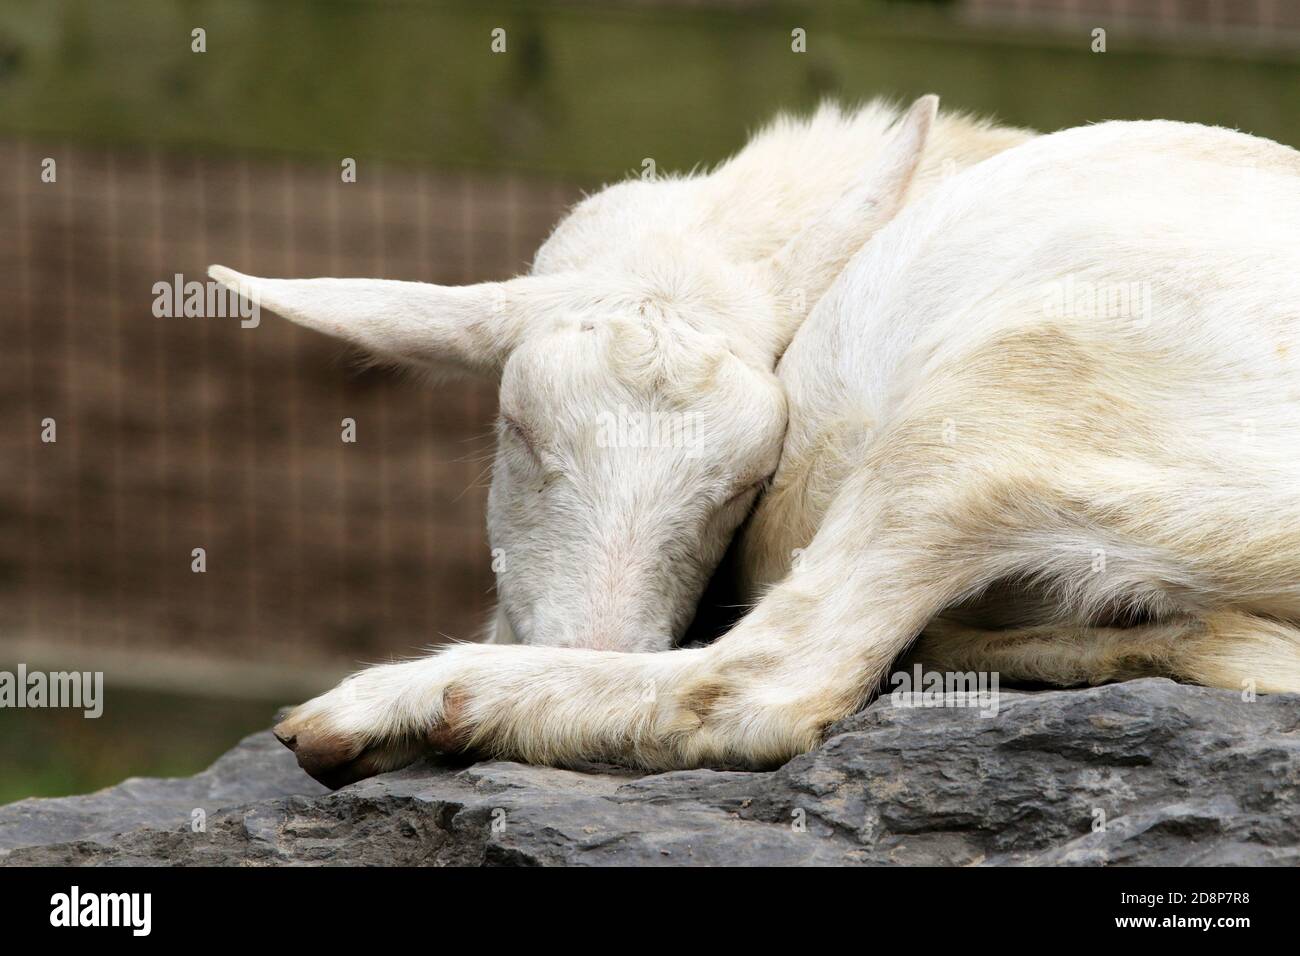 A goat contentedly sleeping. Cape May County Zoo, New Jersey, USA Stock Photo